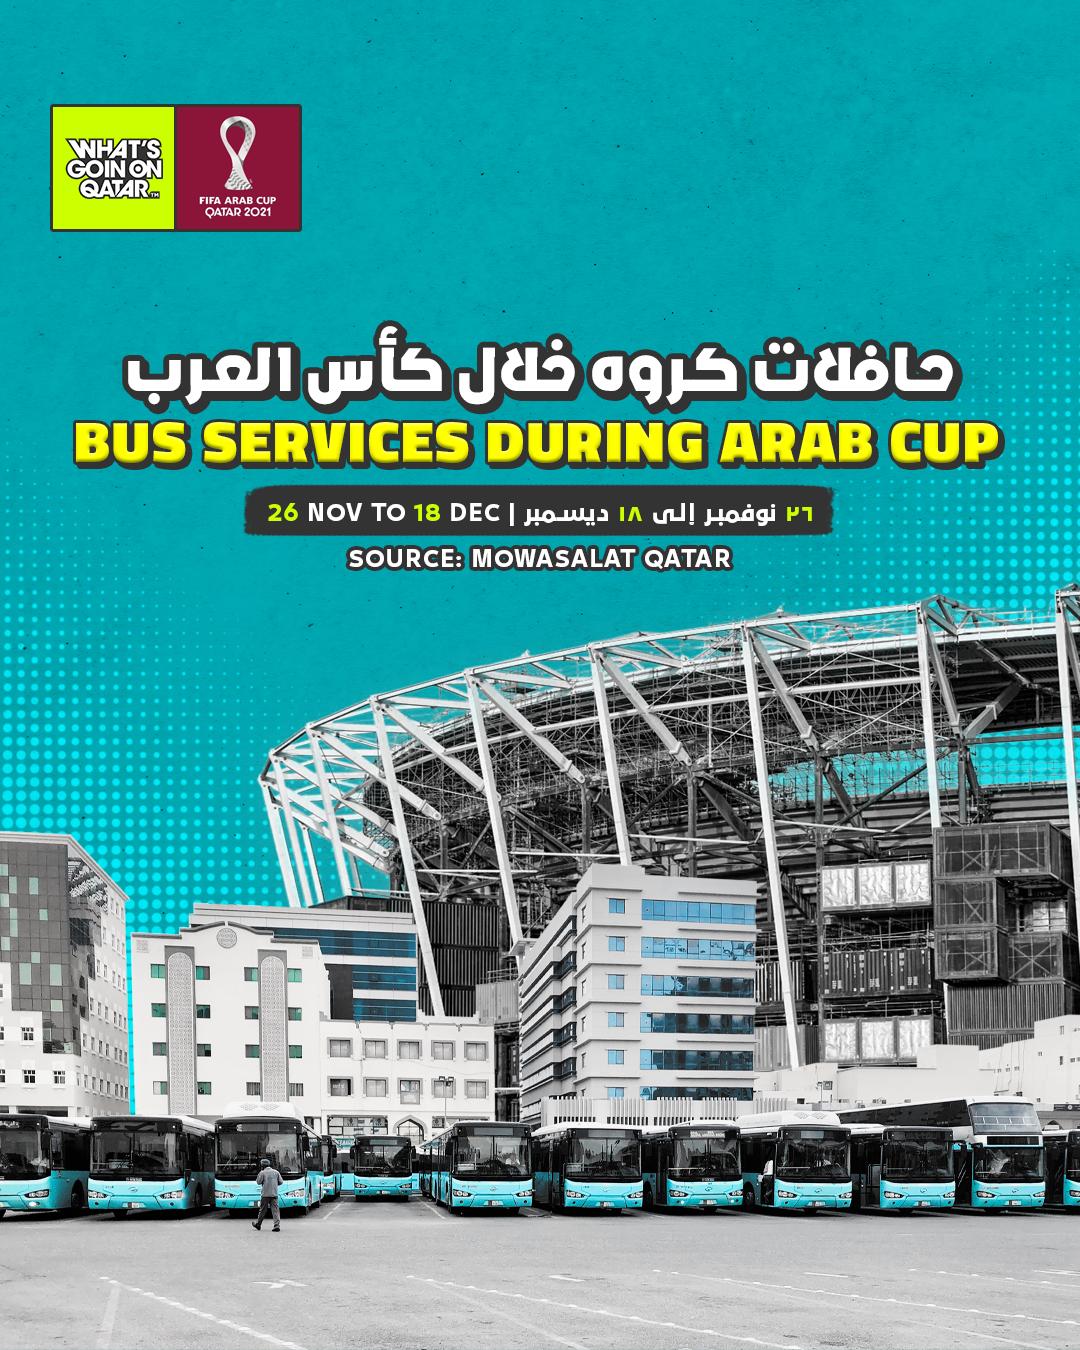 Bus services during Arab cup